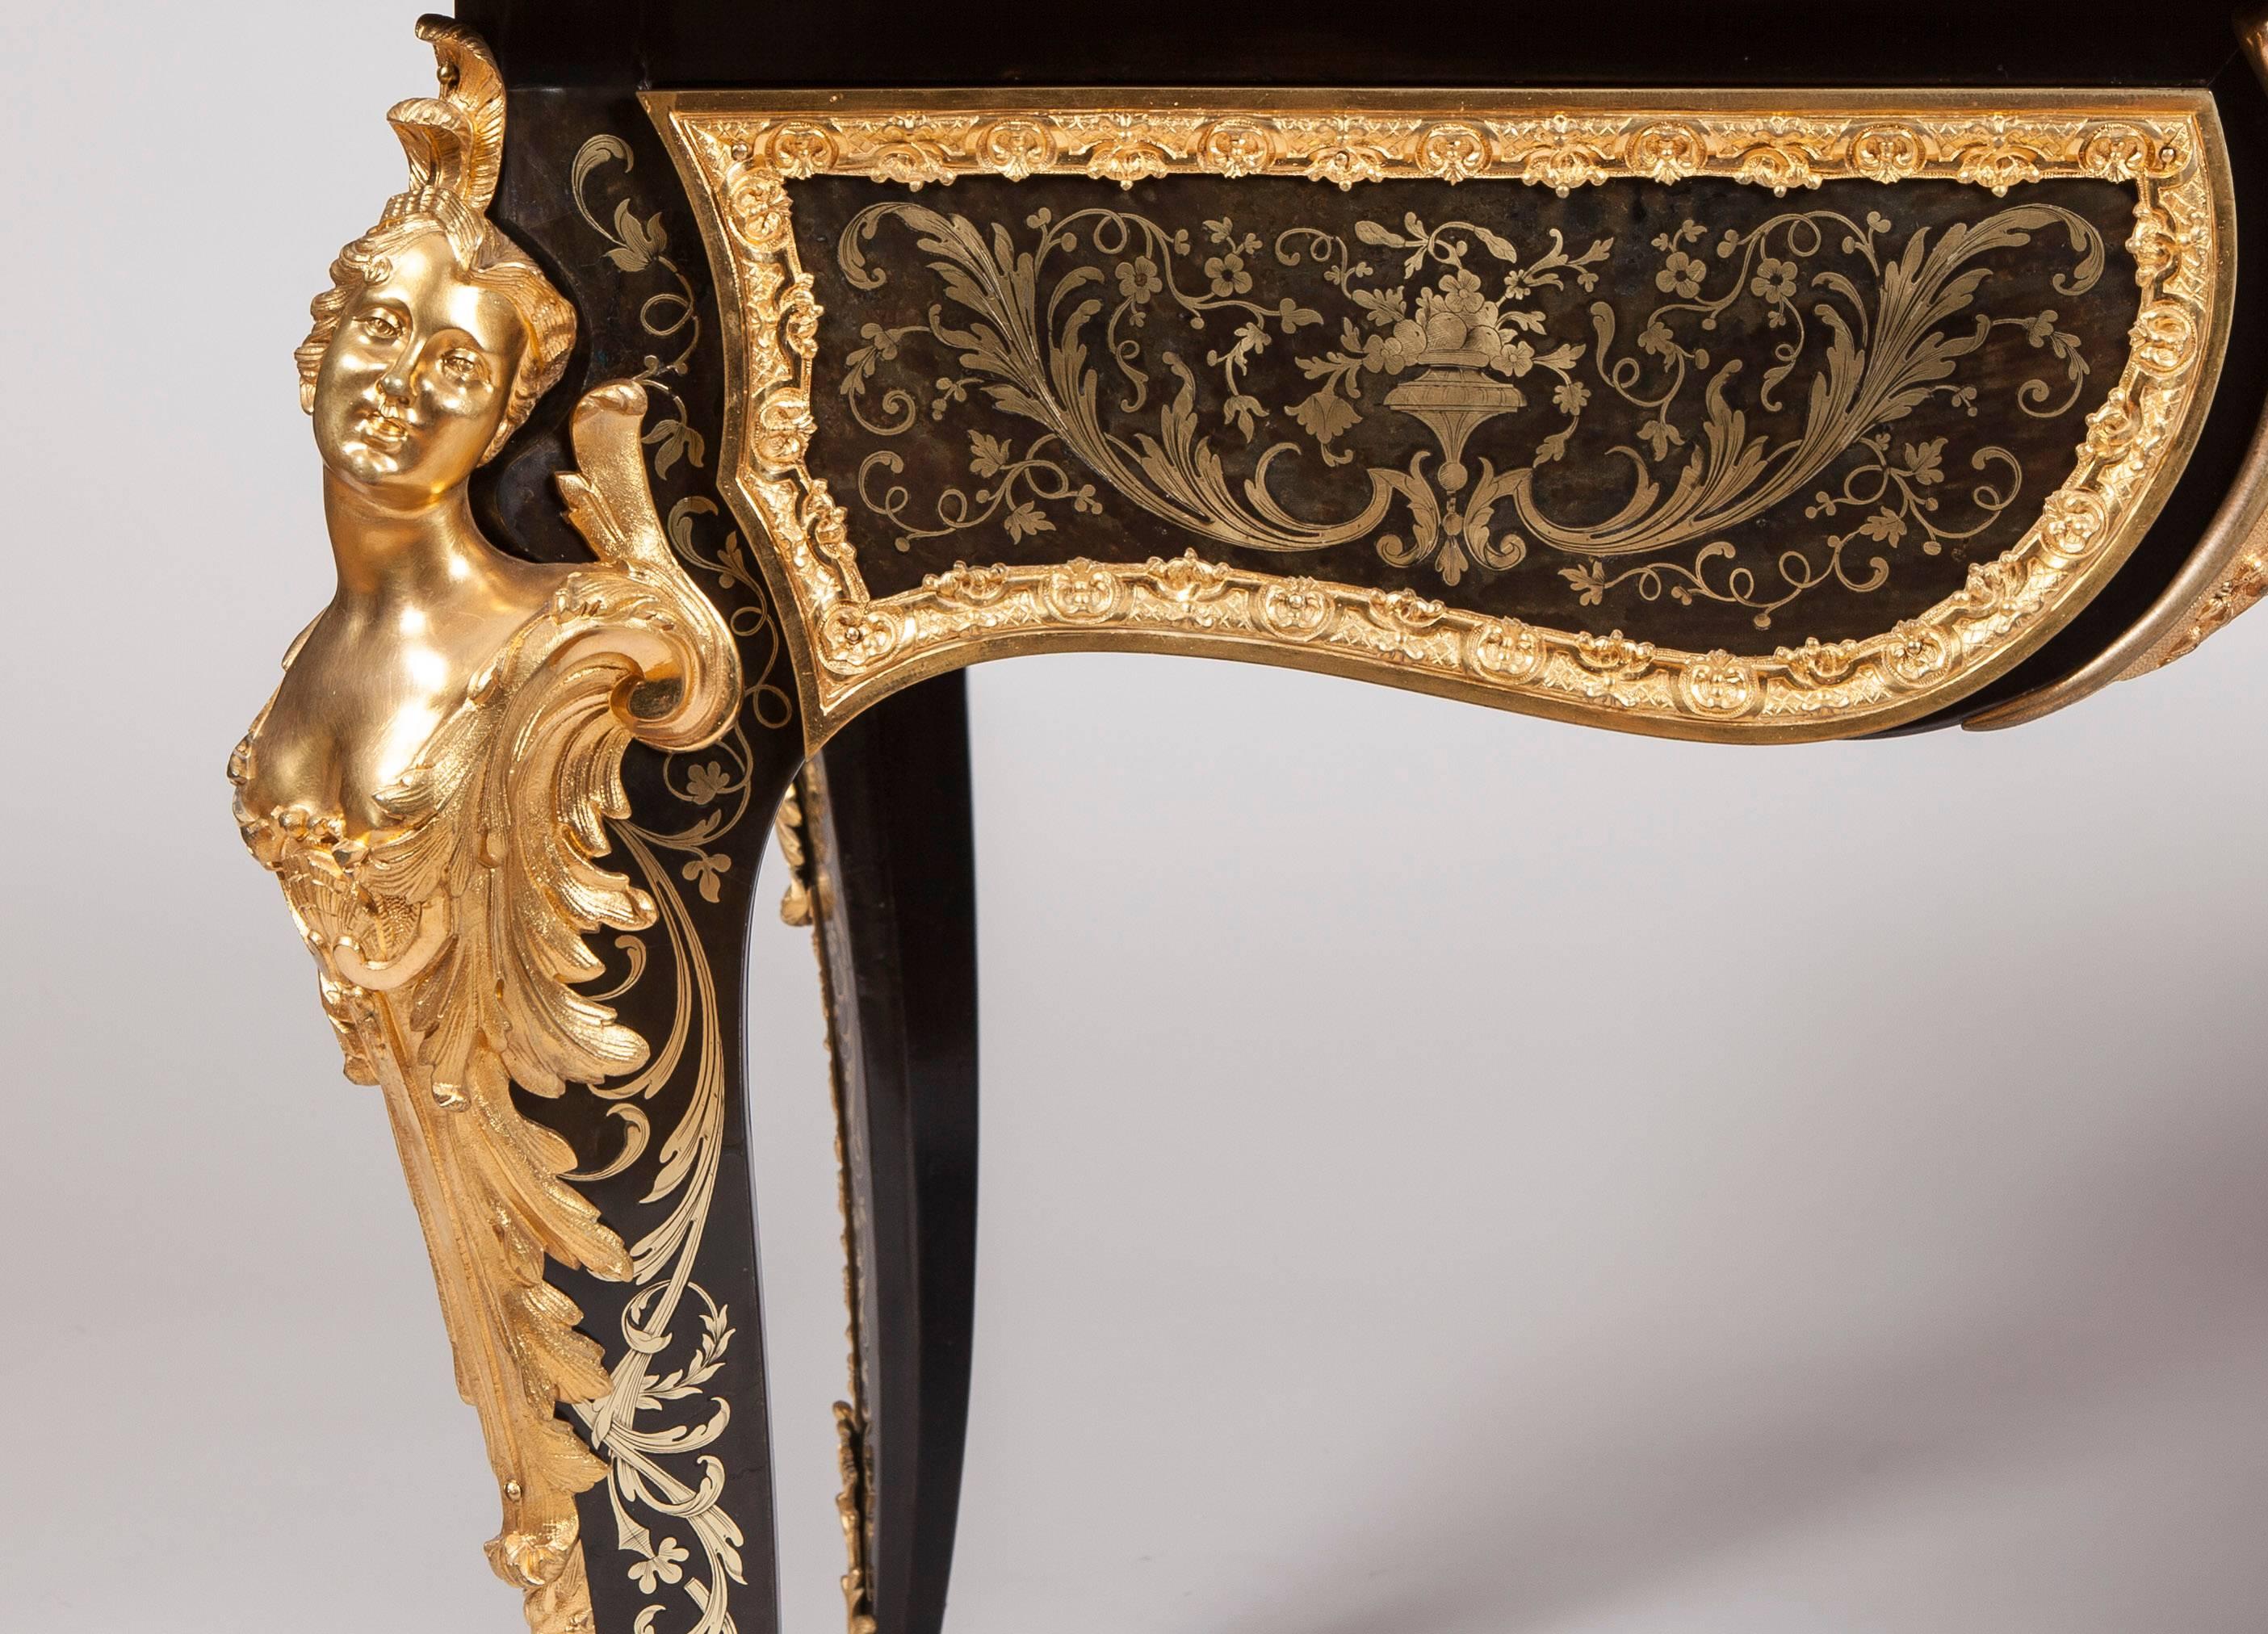 A Fine Bureau Plat in the Manner of André-Charles Boulle

Constructed in ebony with arabesque foliate cut brass inlays, with premiere-partie panels set with tortoiseshell grounds and brass inlay work, and having extensive fine quality ormolu mounts;